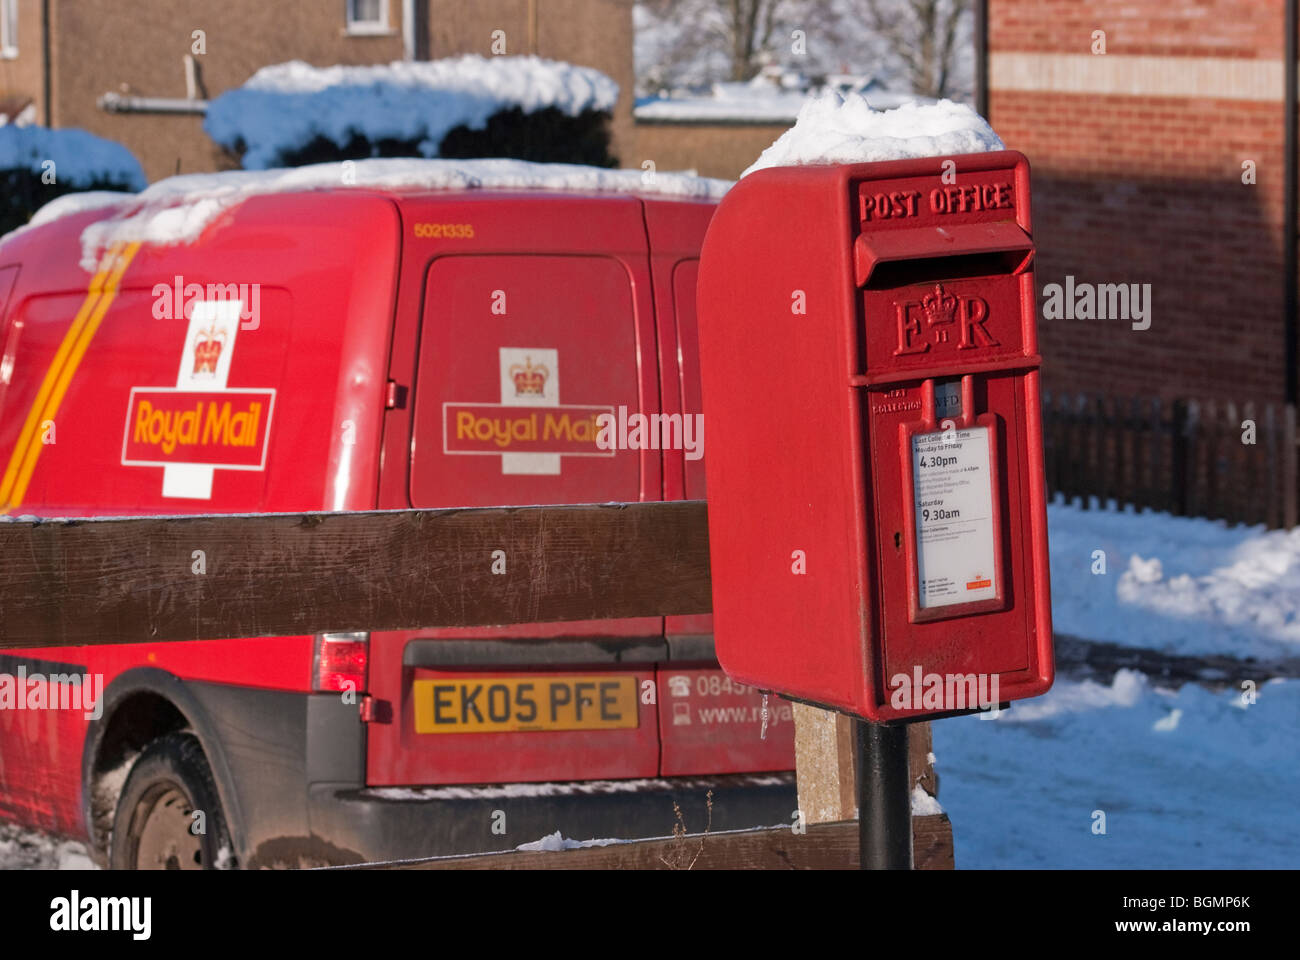 A Royal Mail delivery van parked next to a snow topped Queen Elizabeth II Lamp Box, Buckinghamshire, England, United Kingdom. Stock Photo